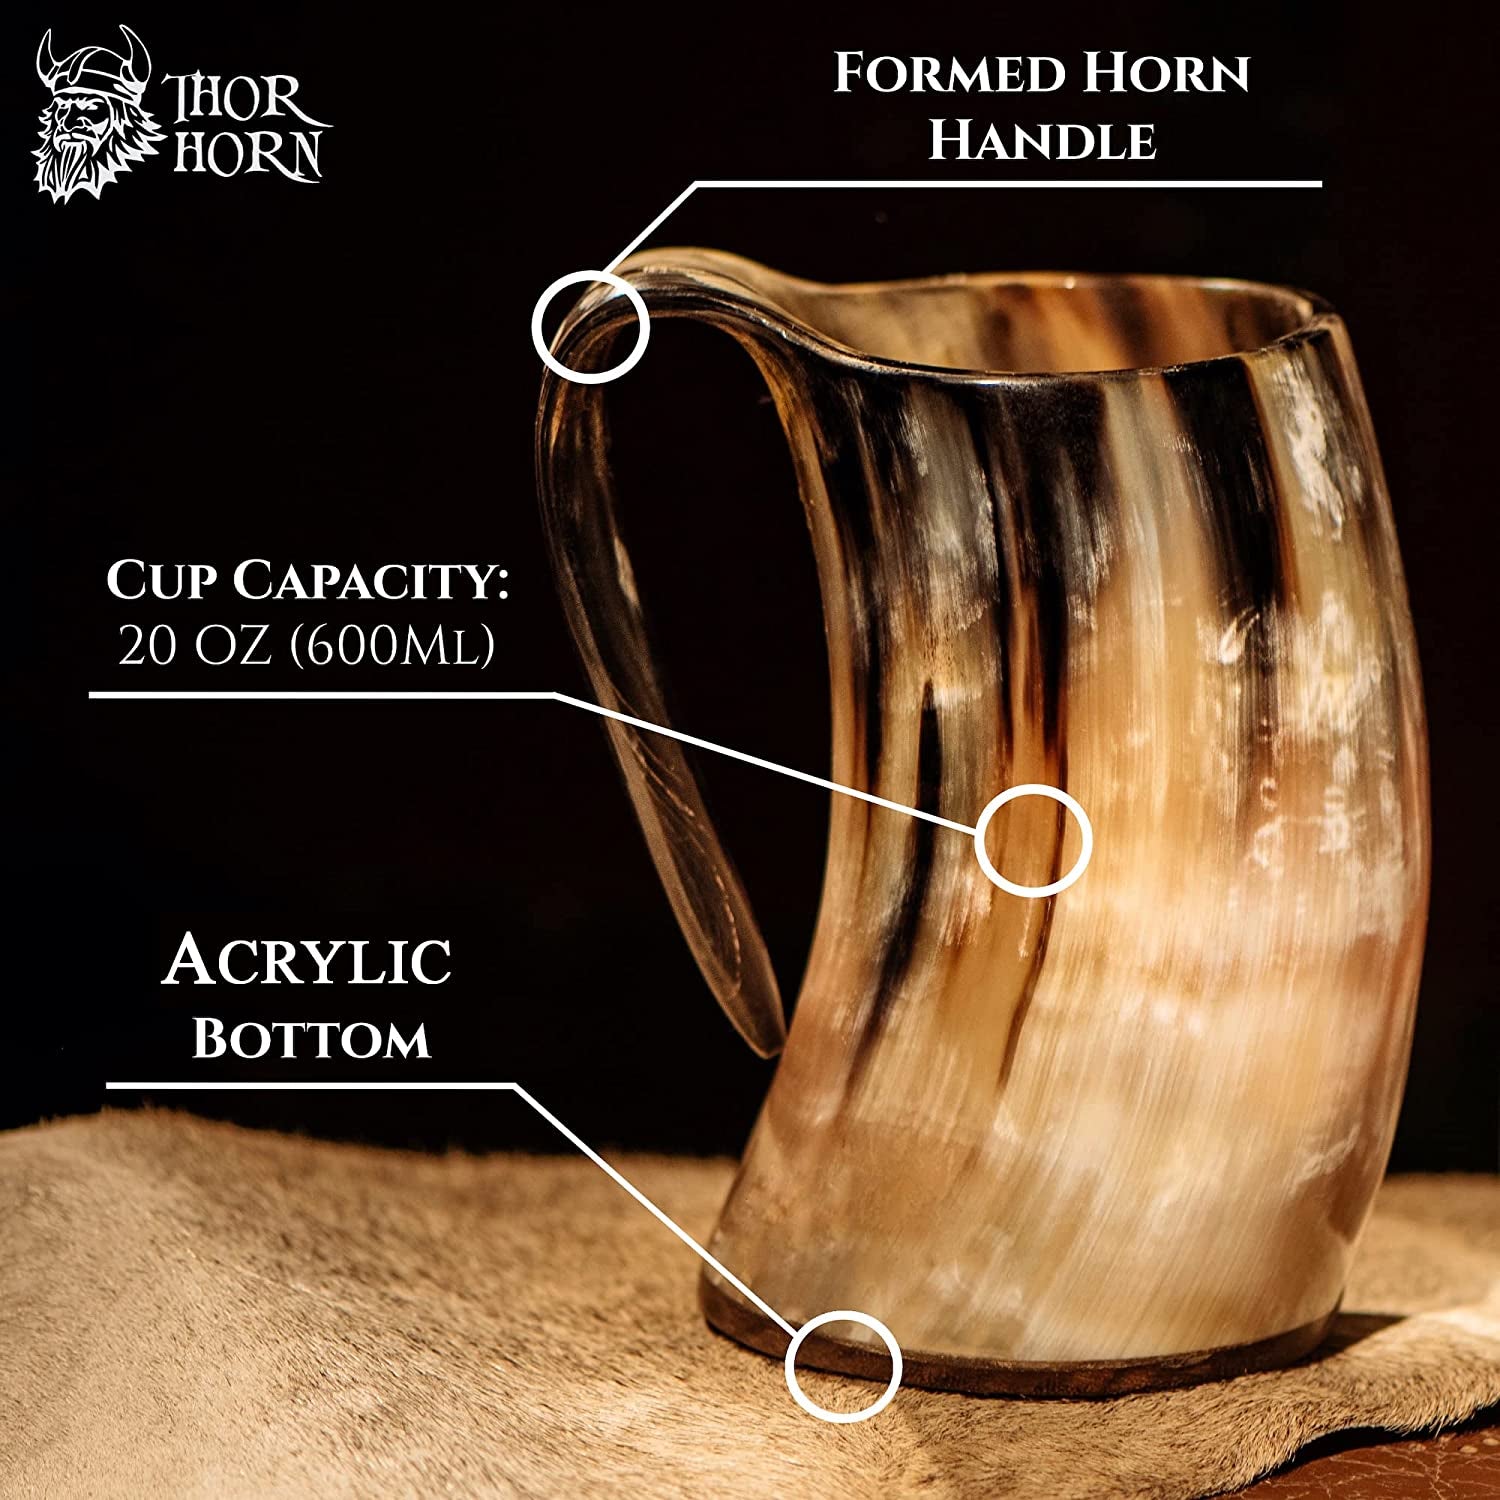 Viking Drinking Horn Mug, 15-20 Oz Natural Ox Horn Cup & Cofee Stein | Cool Unique Beer Gift for Men and Women, Home Decor Accessories | Medieval Shot Glasses for Ale, Mead, Whiskey, Alcohol